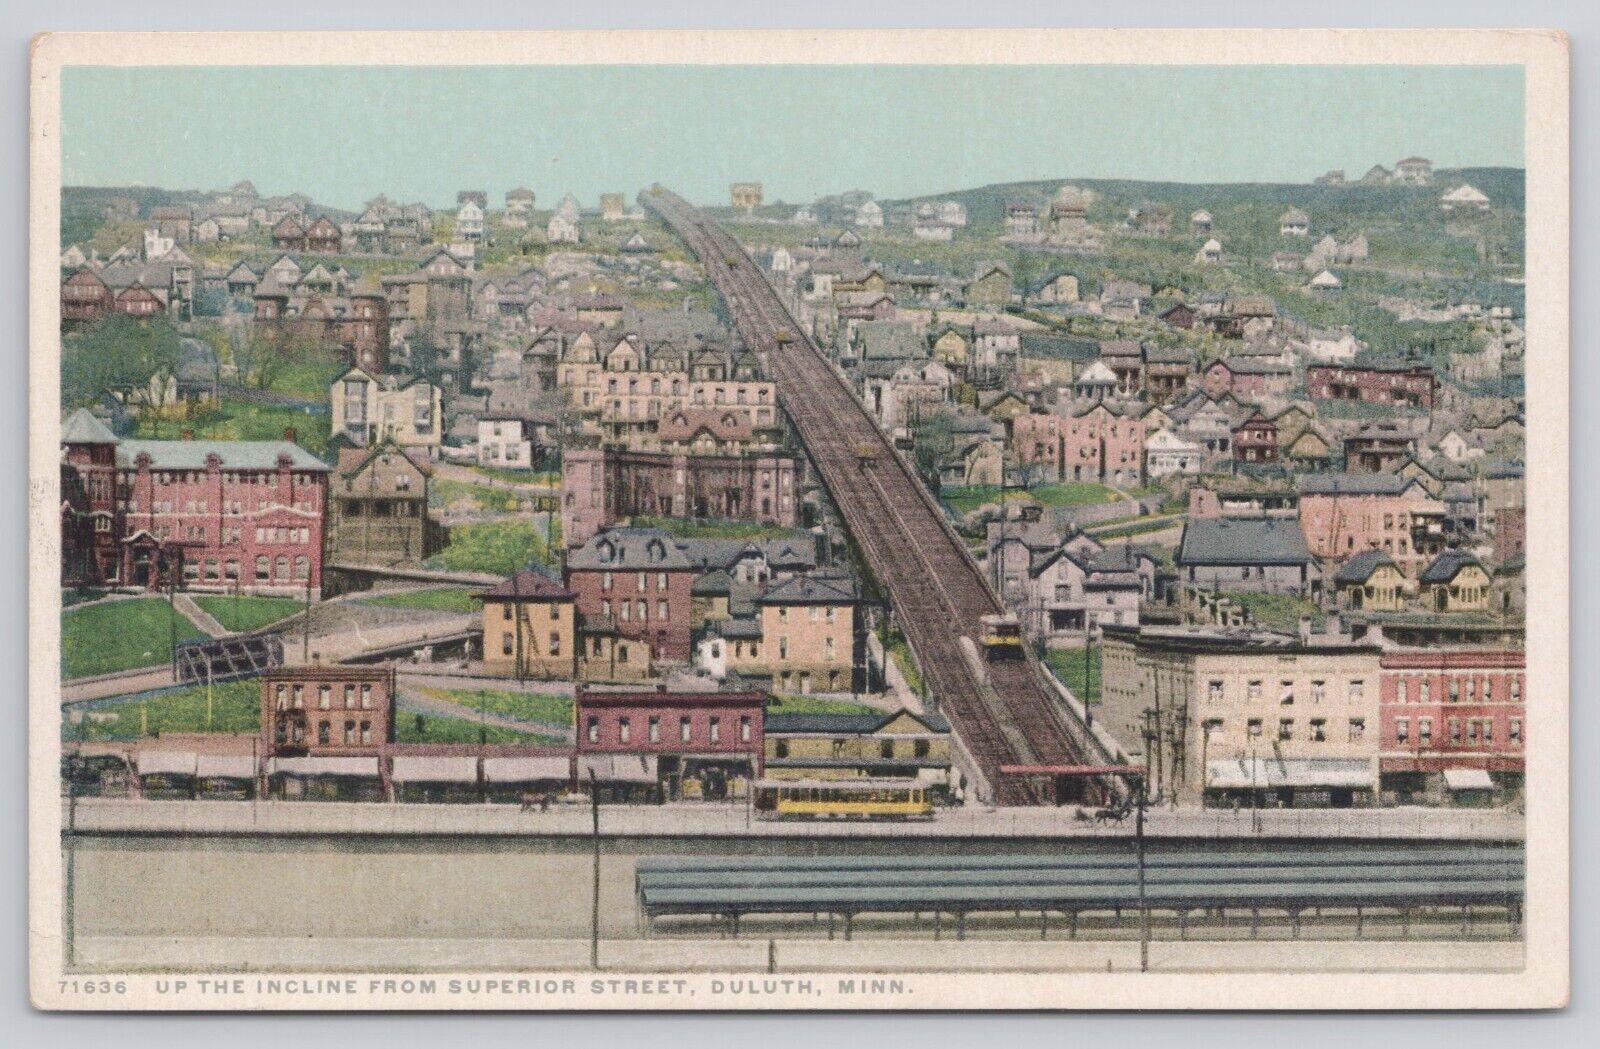 Duluth Minnesota MN Up the Incline Railroad from Superior Street Postcard